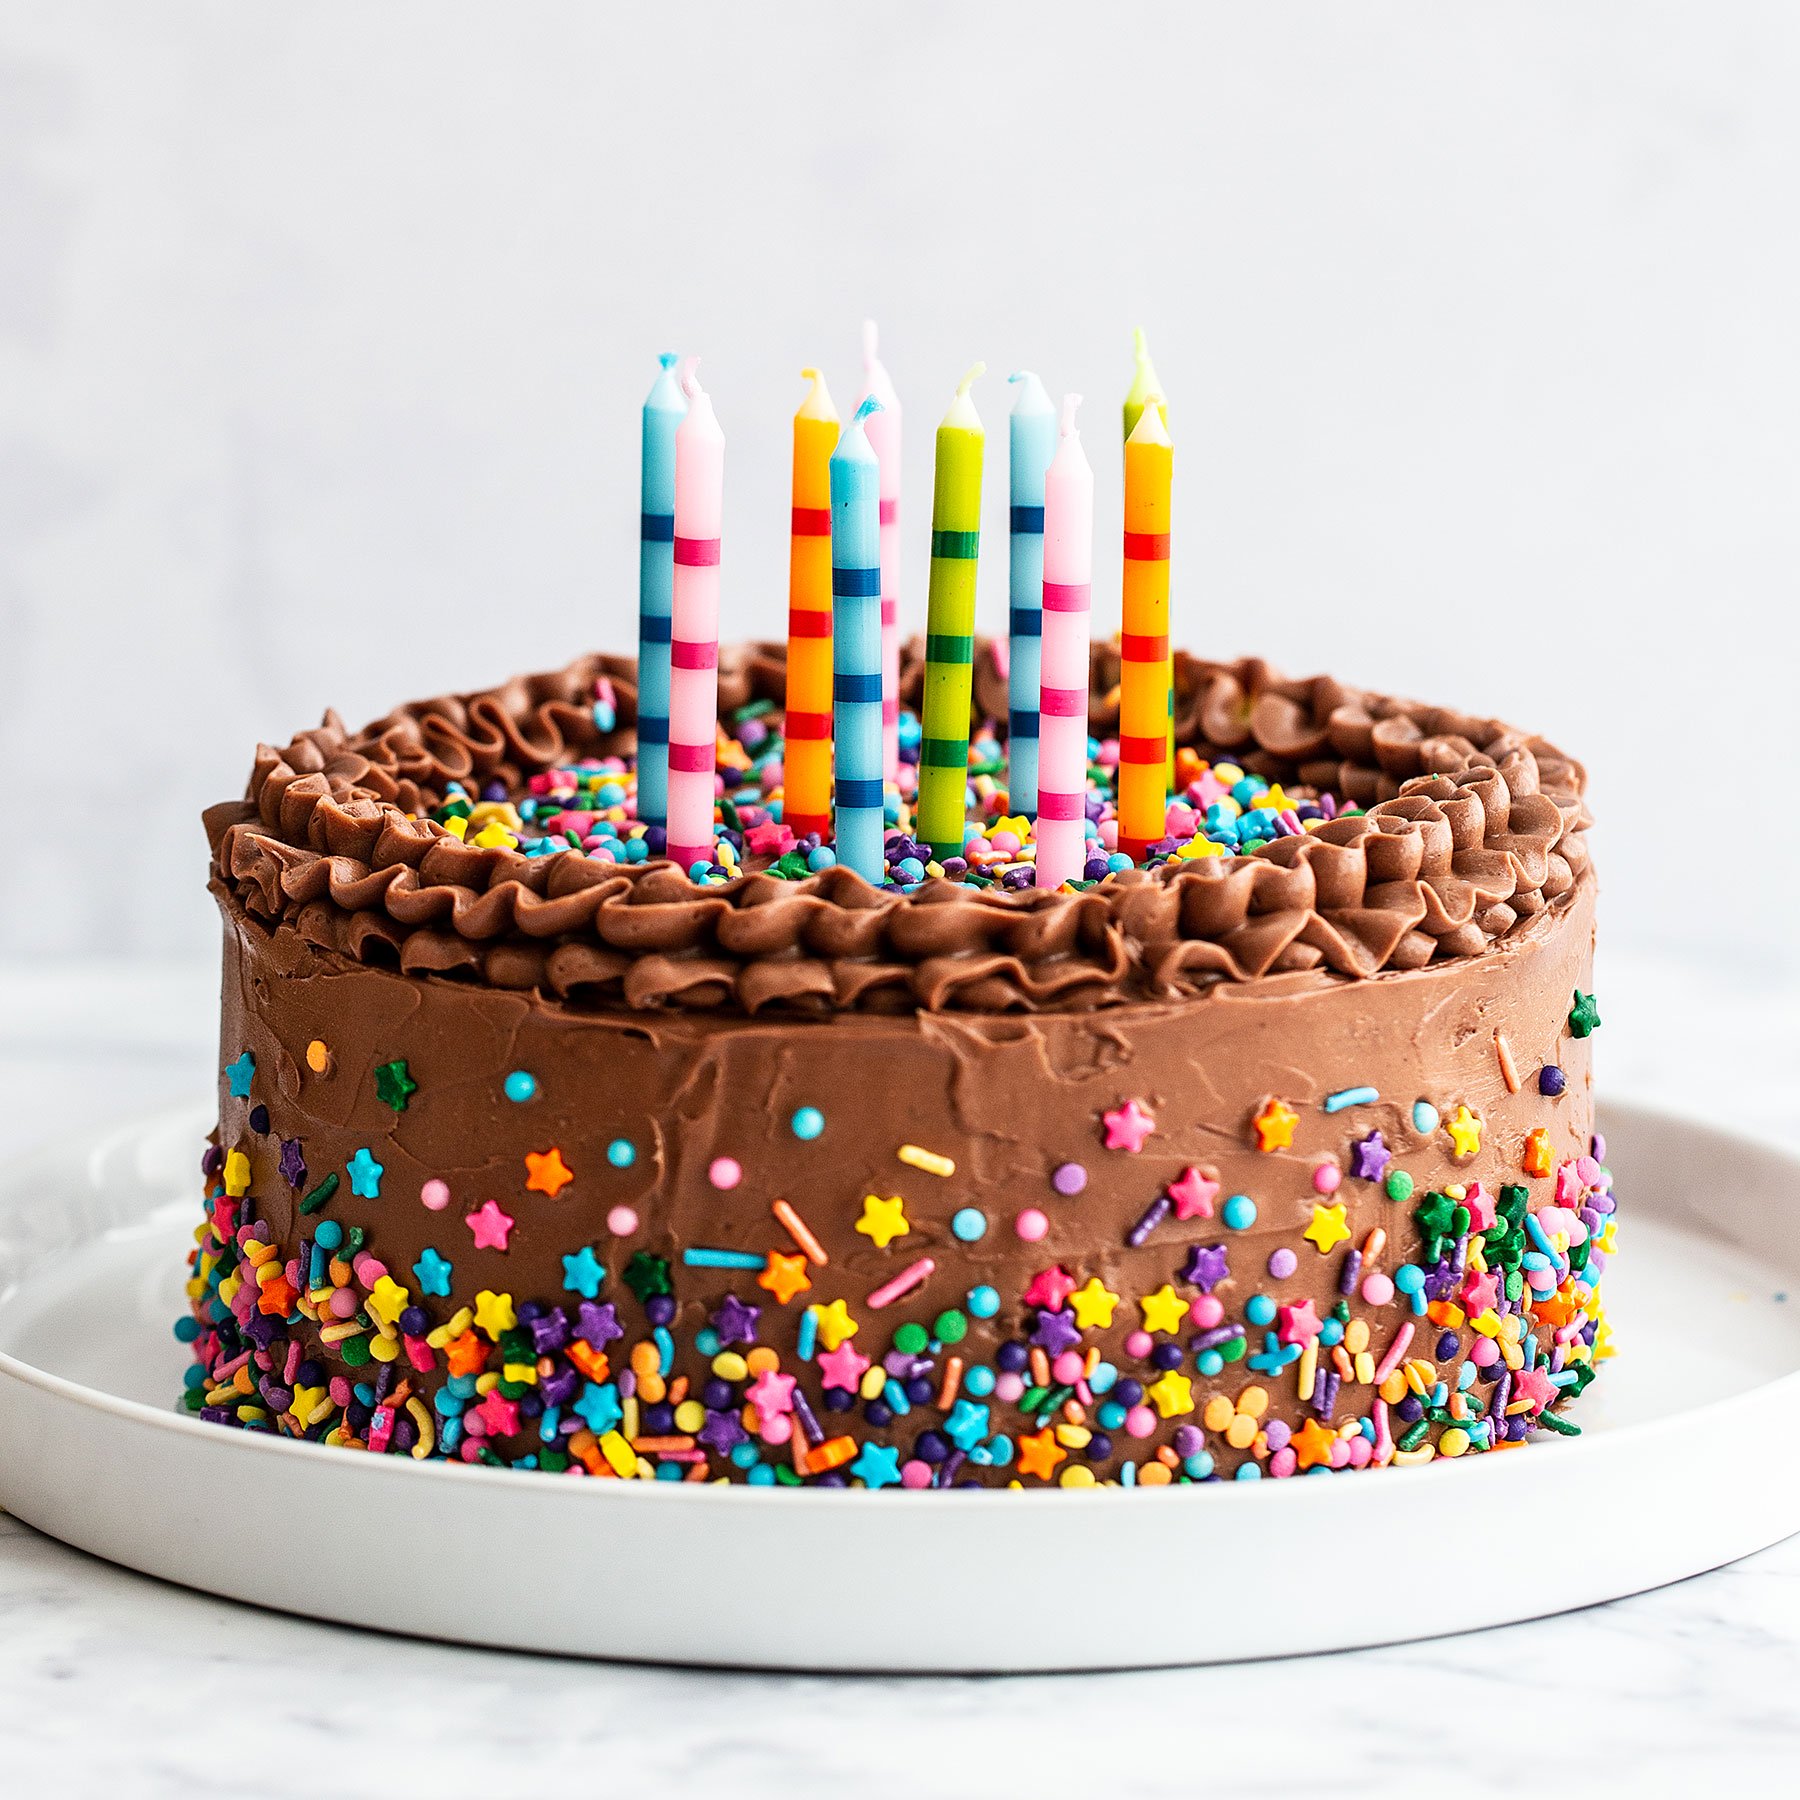 Best Happy Birthday cake images [50+ HD HQ] - 2021